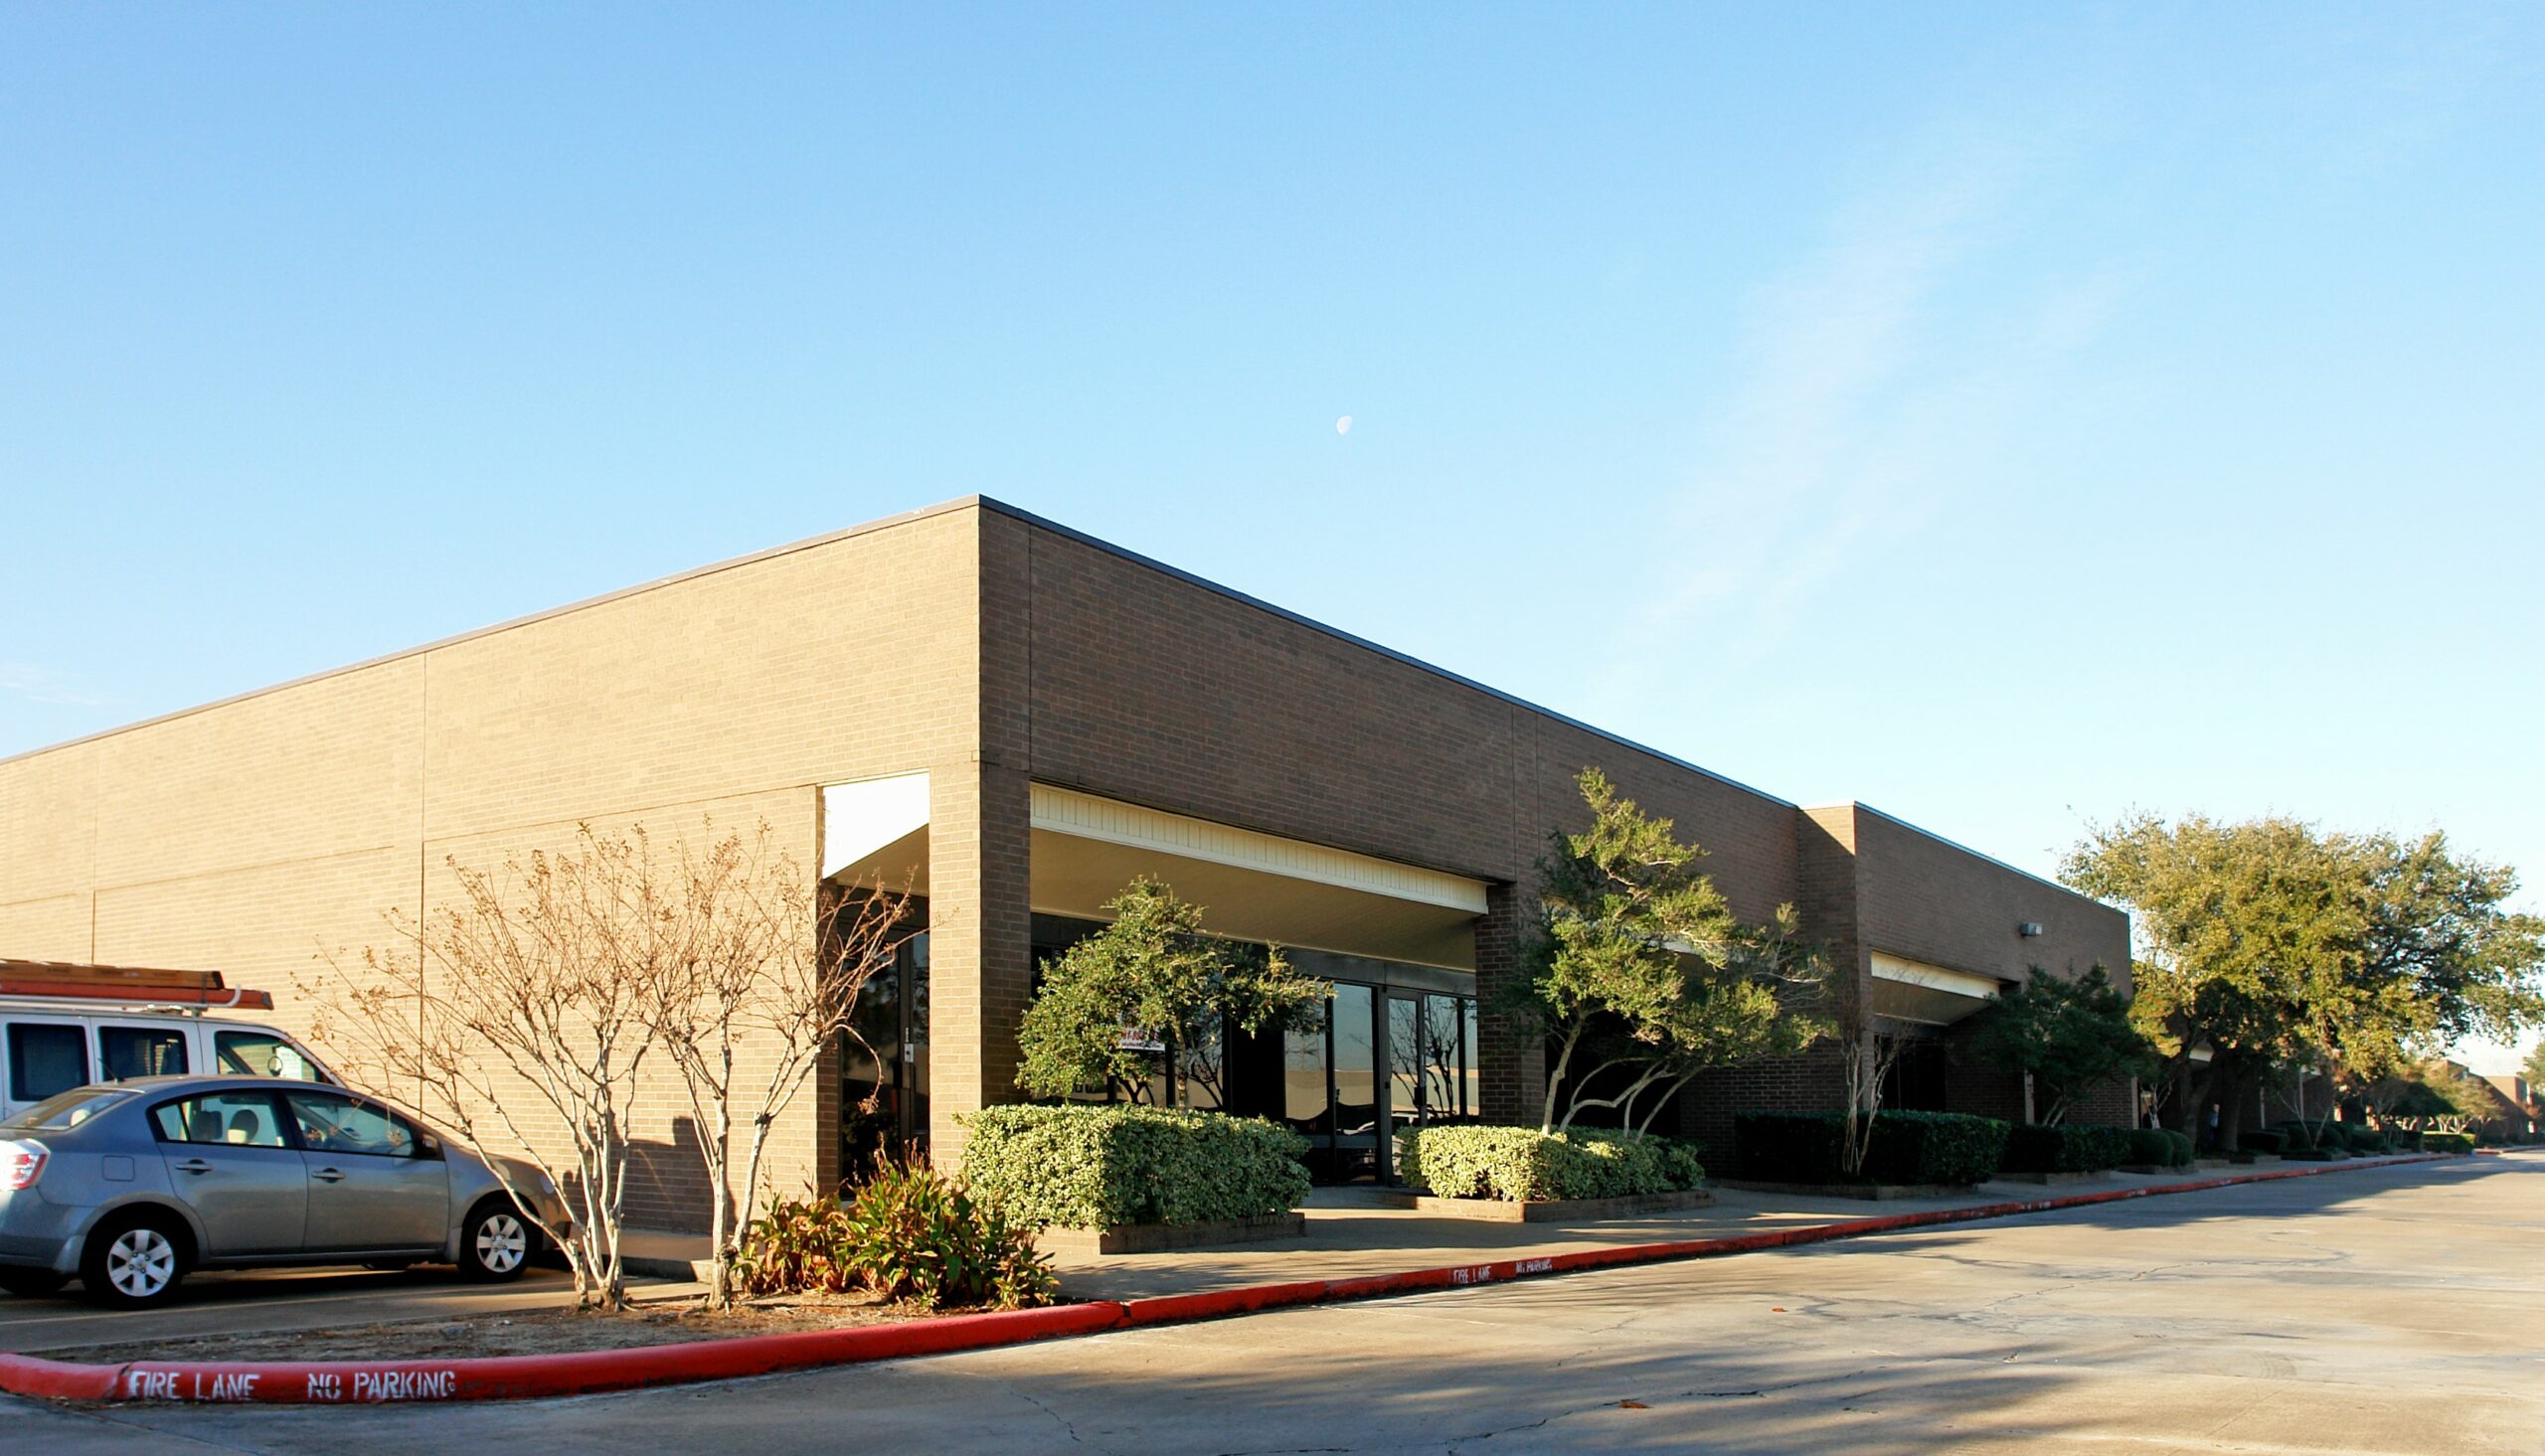 Partners acquires 53,500-sq.-ft flex industrial property in Southwest Houston